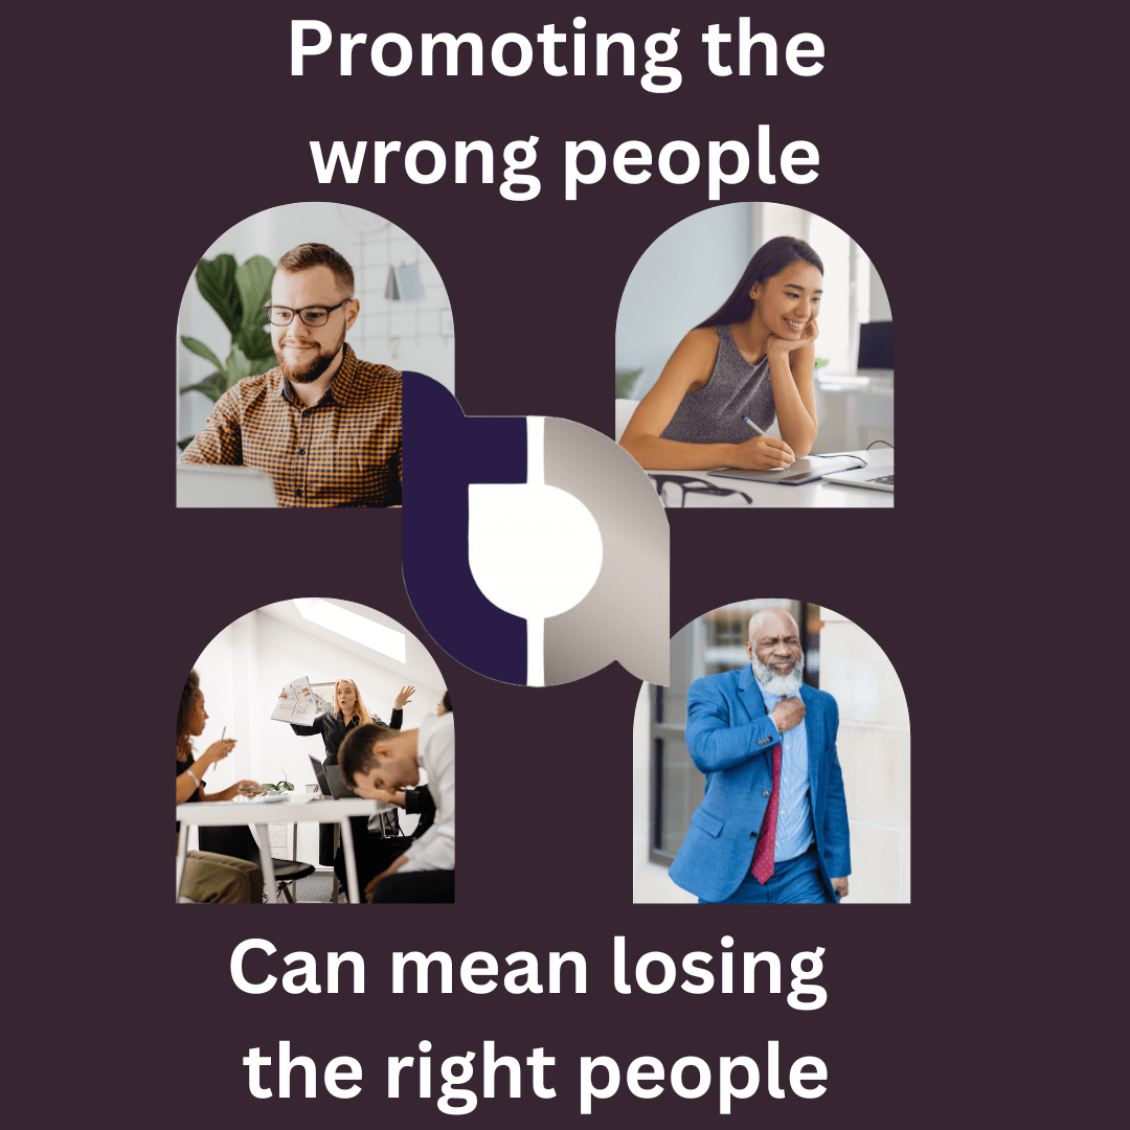 promoting the wrong people can have adverse affects